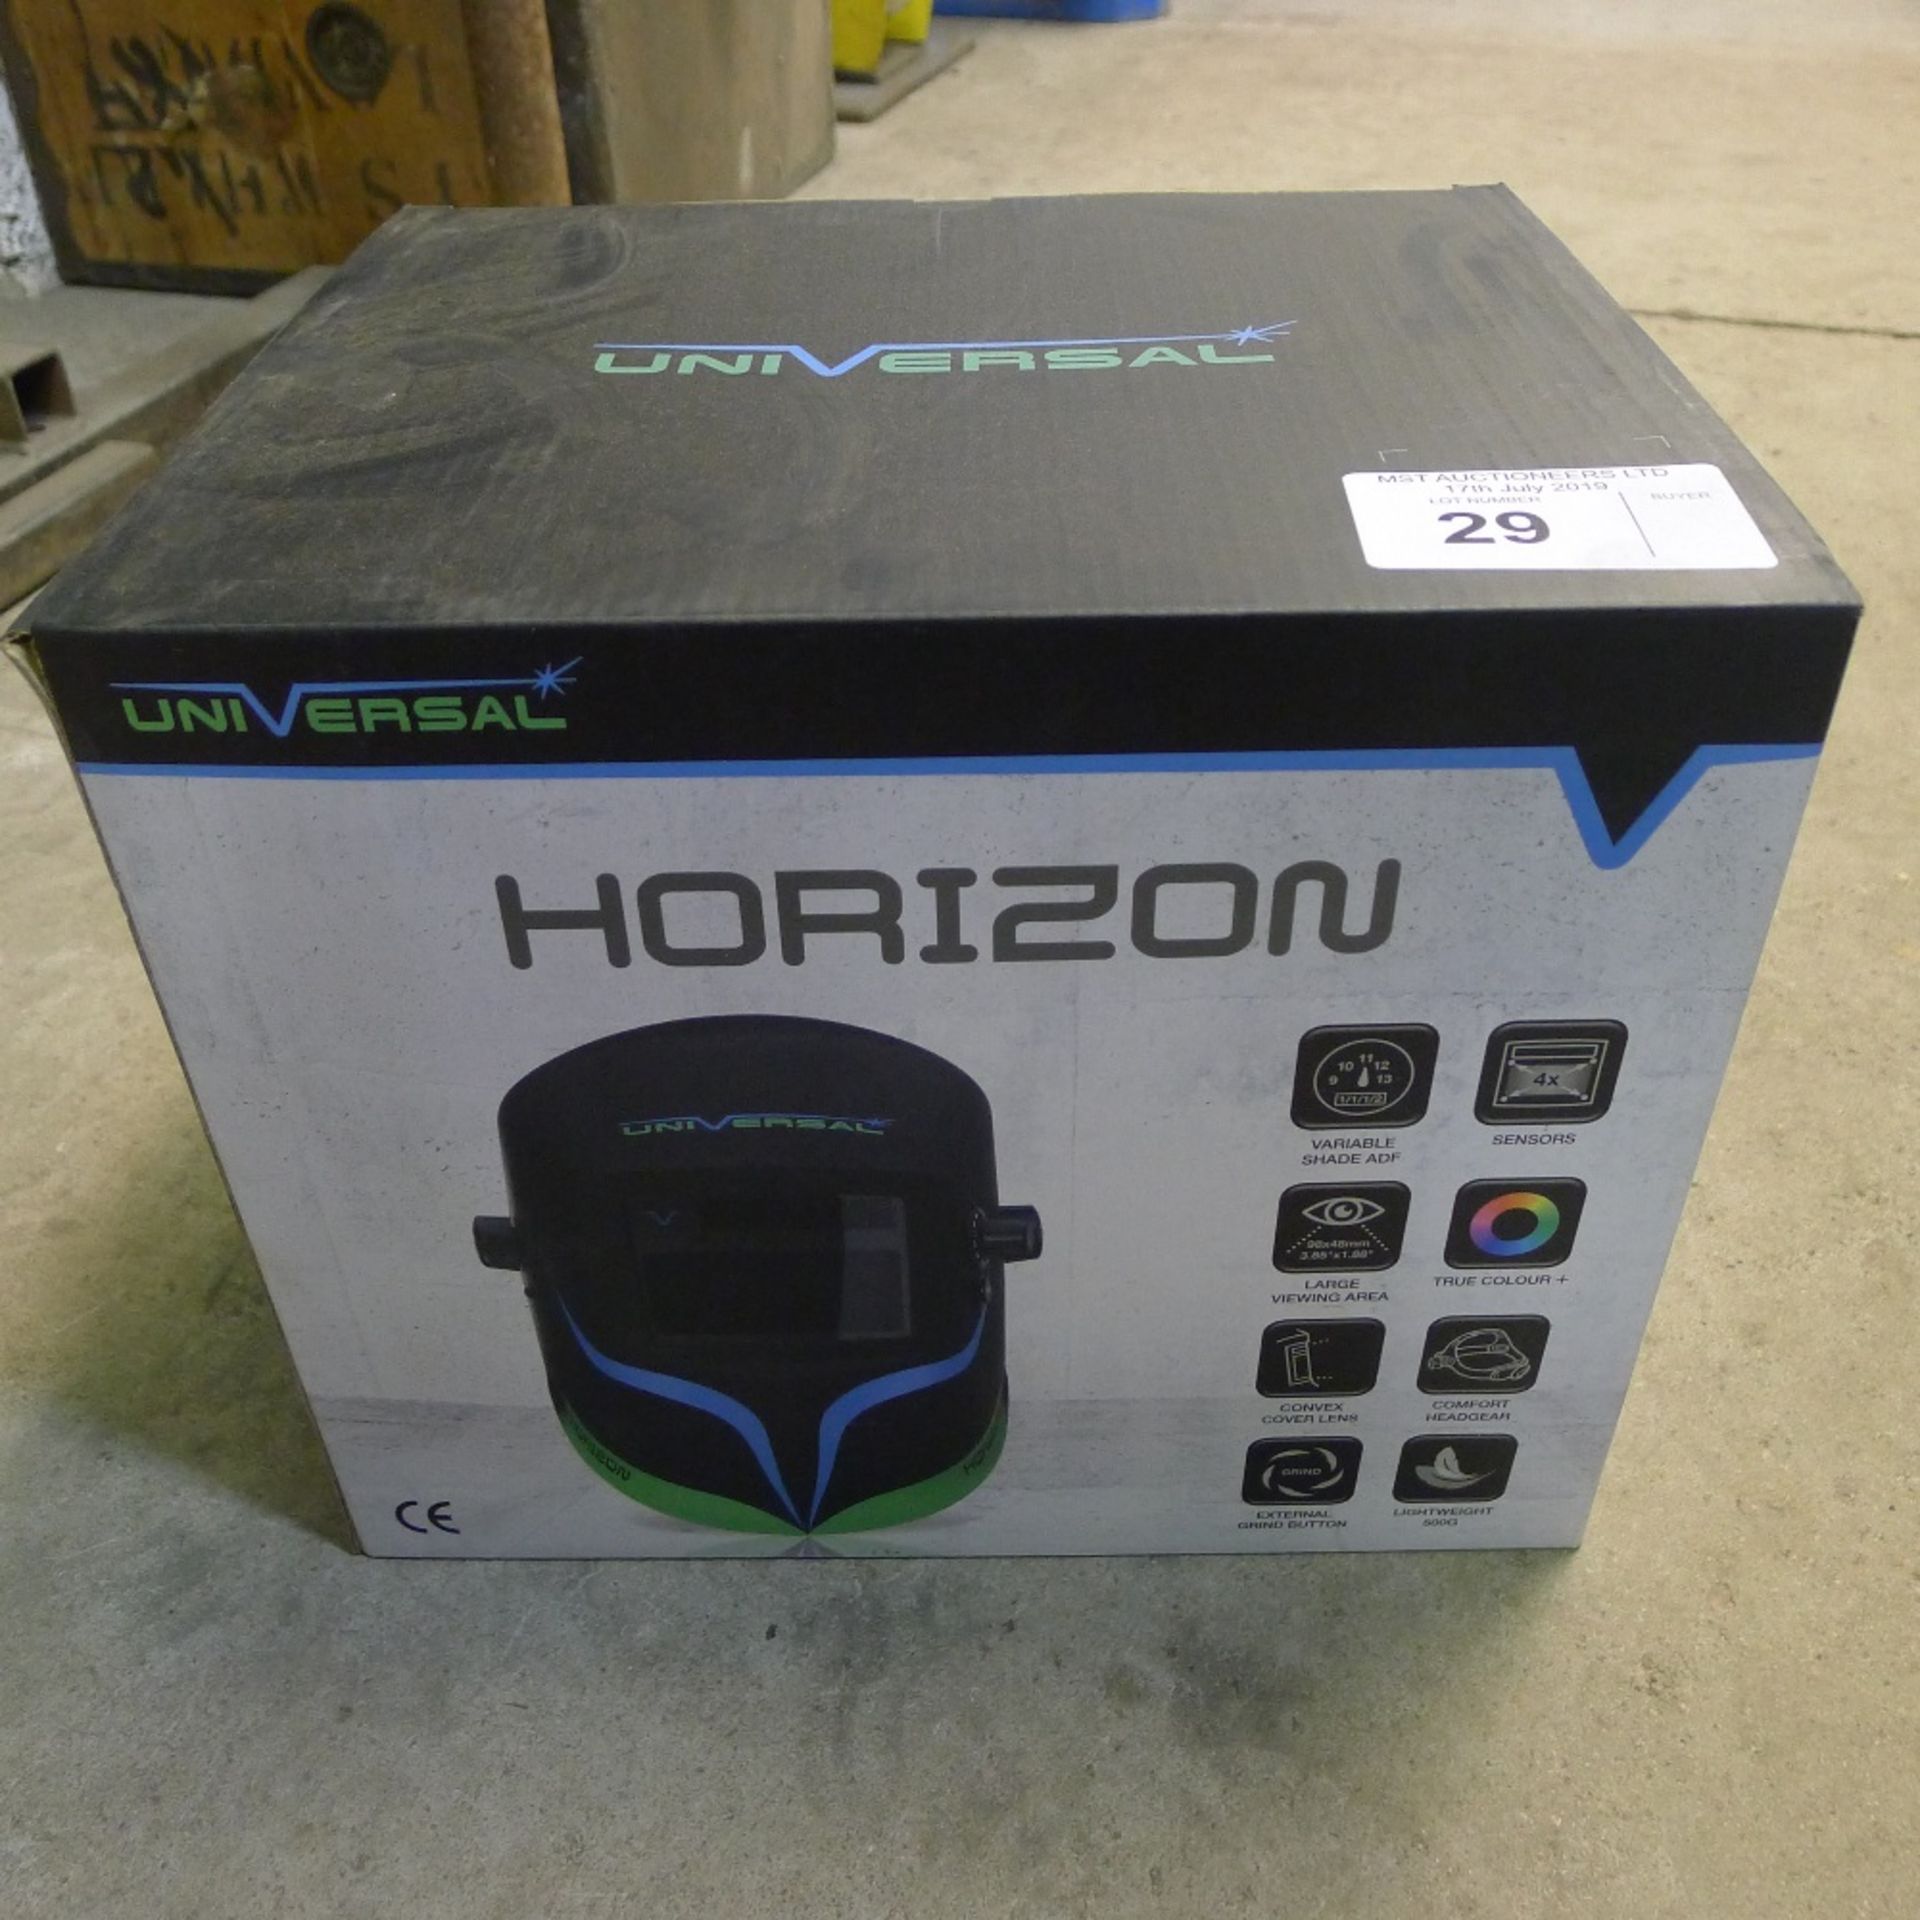 1 welding torch by SWP and 1 welding mask by Universal type Horizon - Image 4 of 6